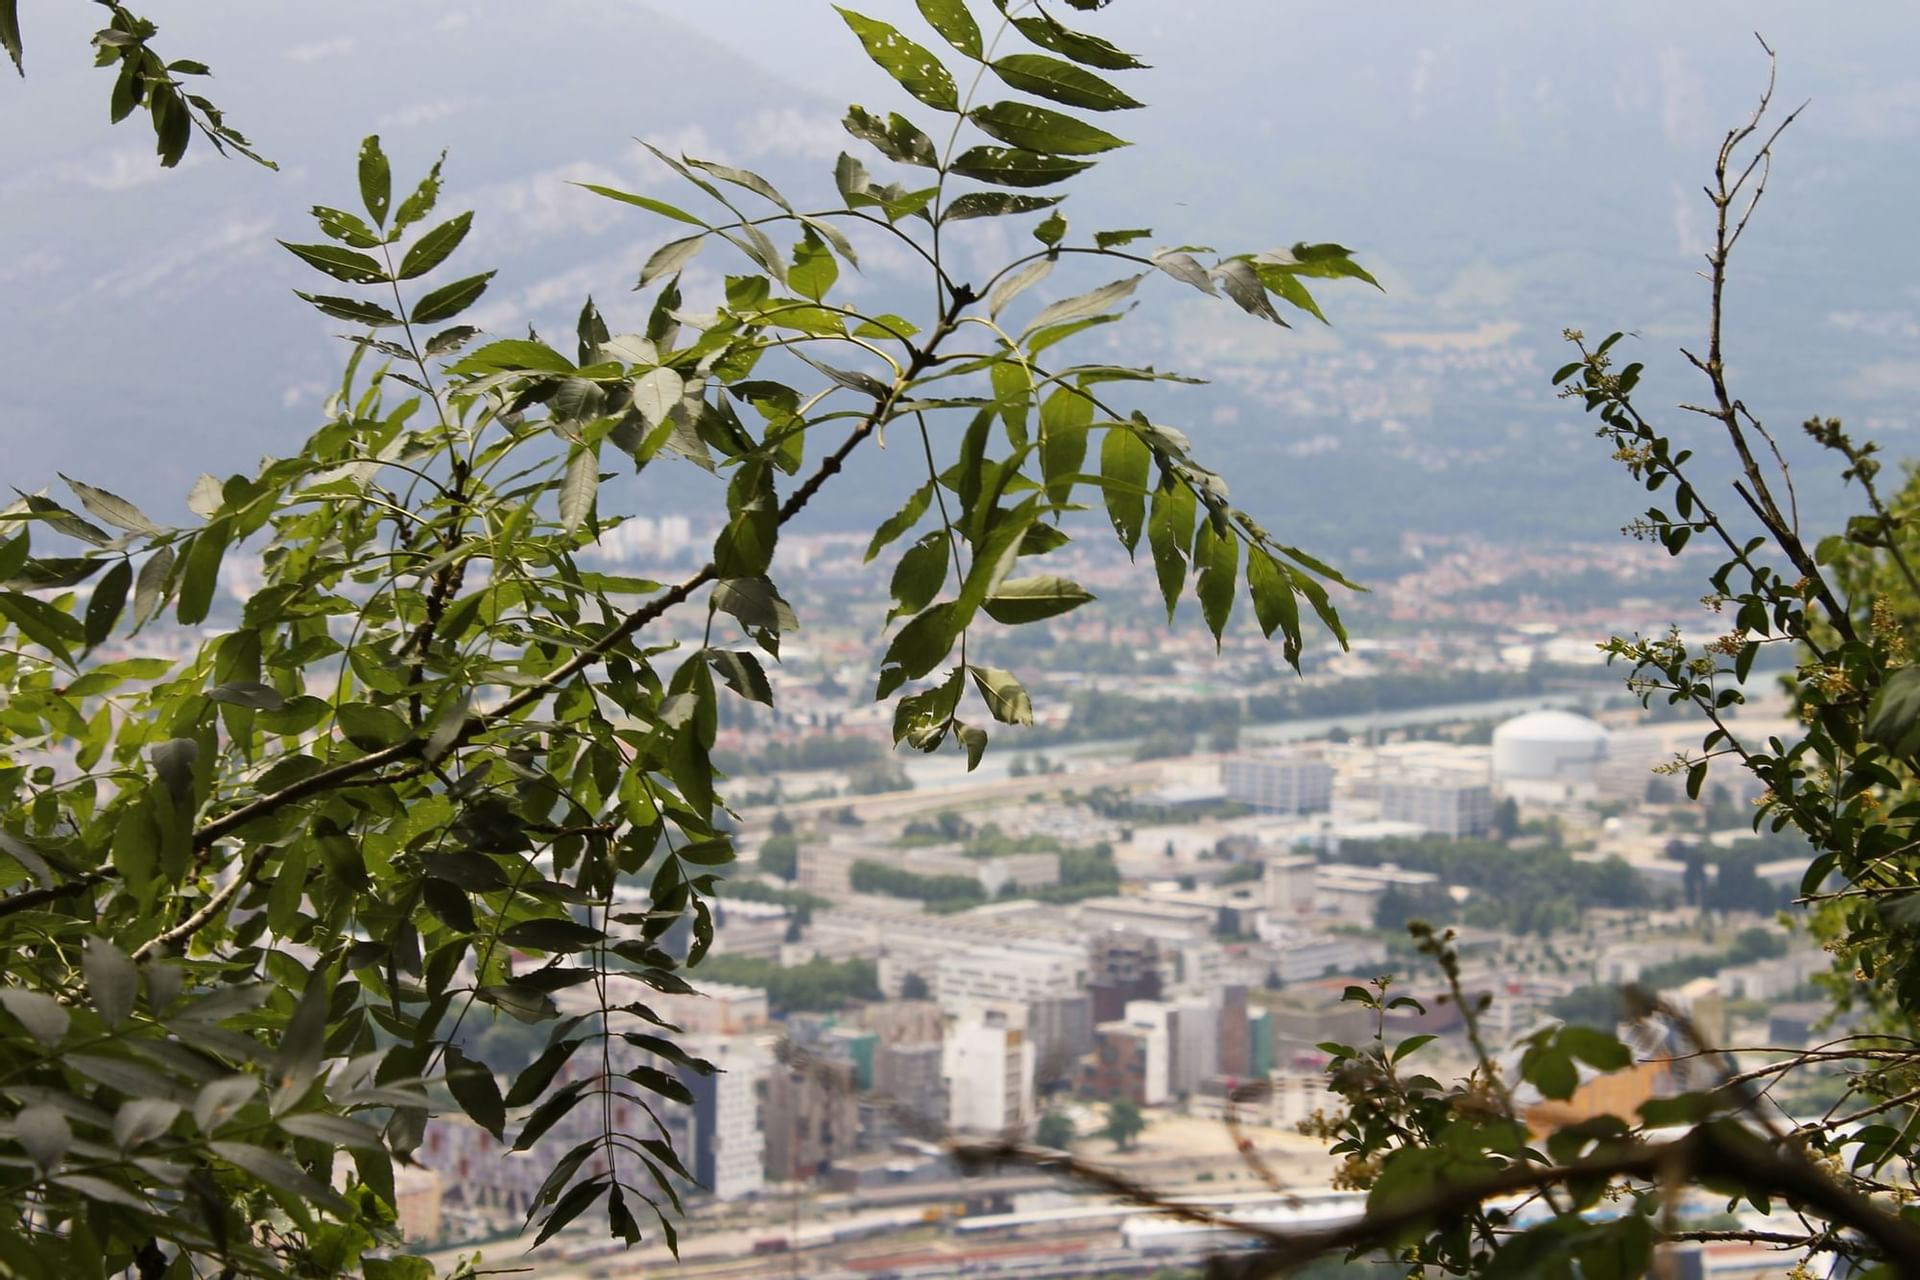 View of a city through trees near The Originals Hotels